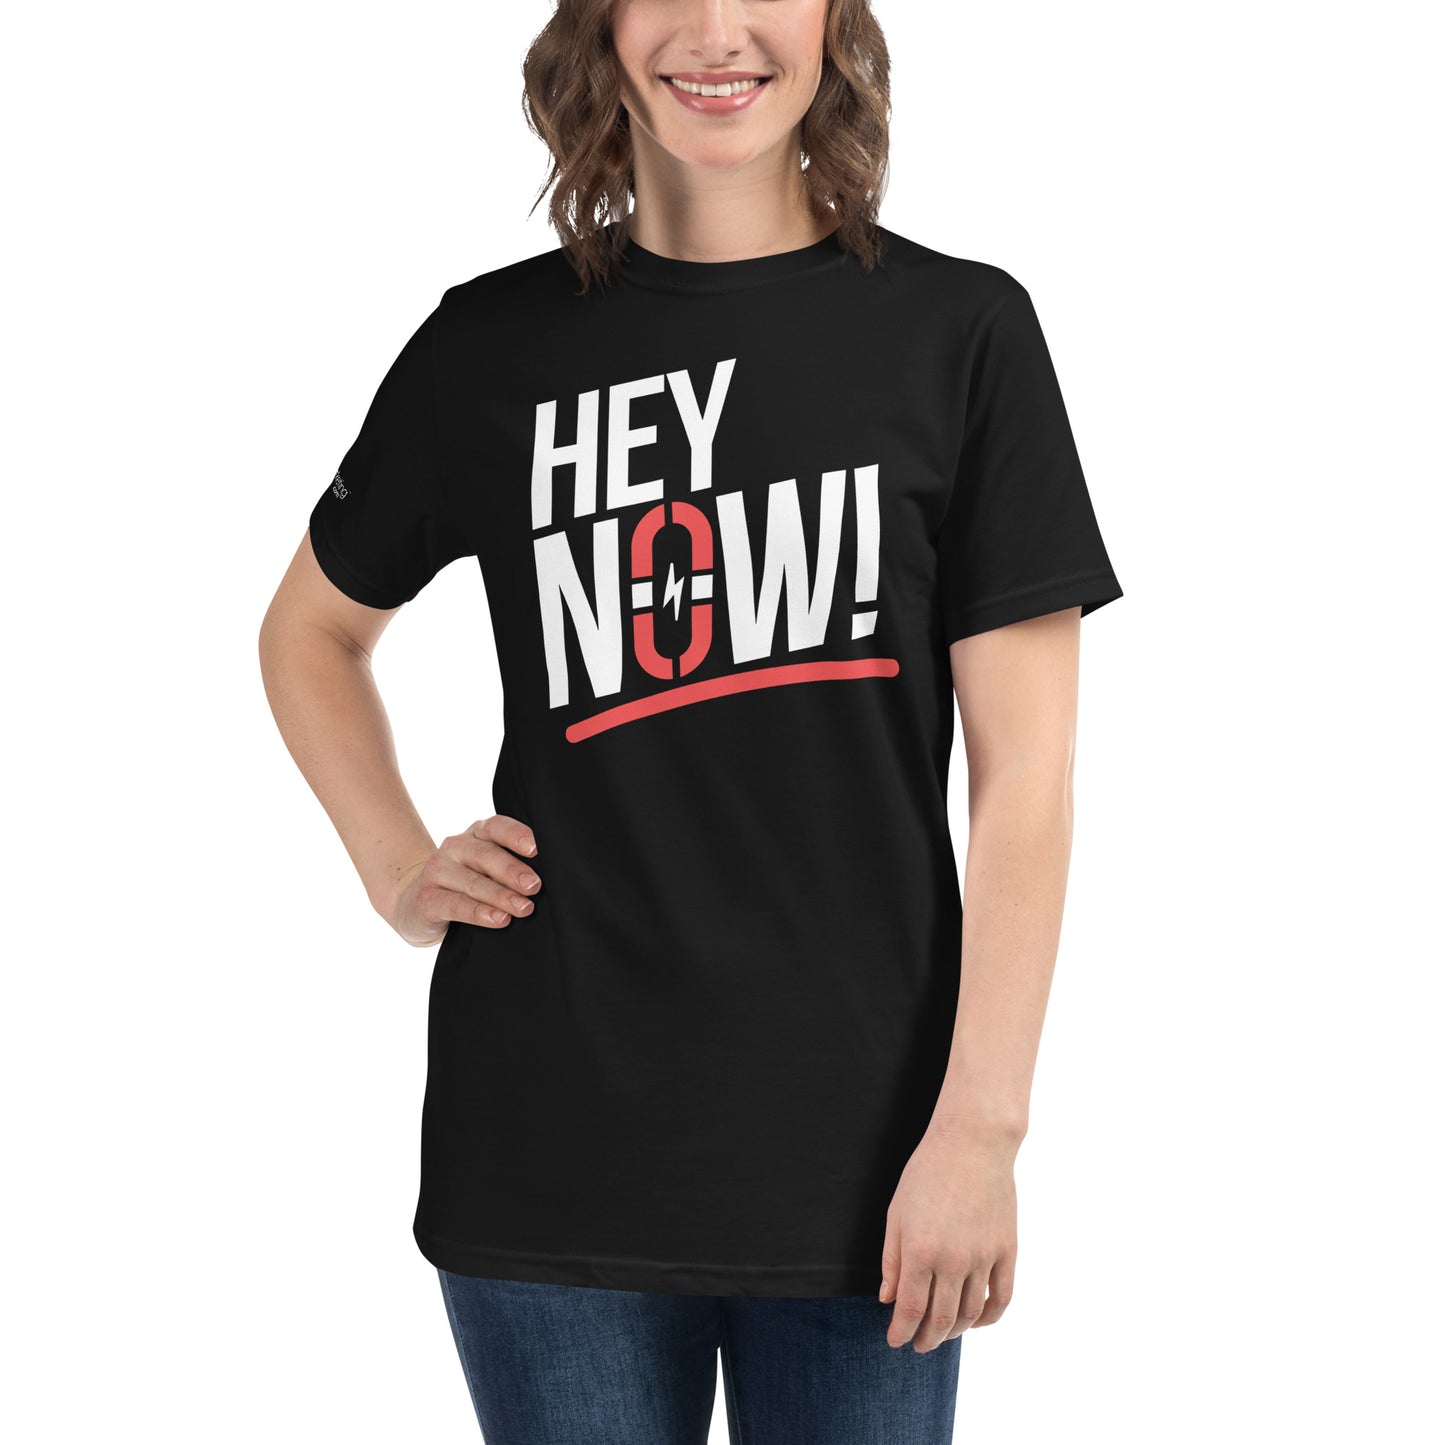 Hey Now! T-Shirt